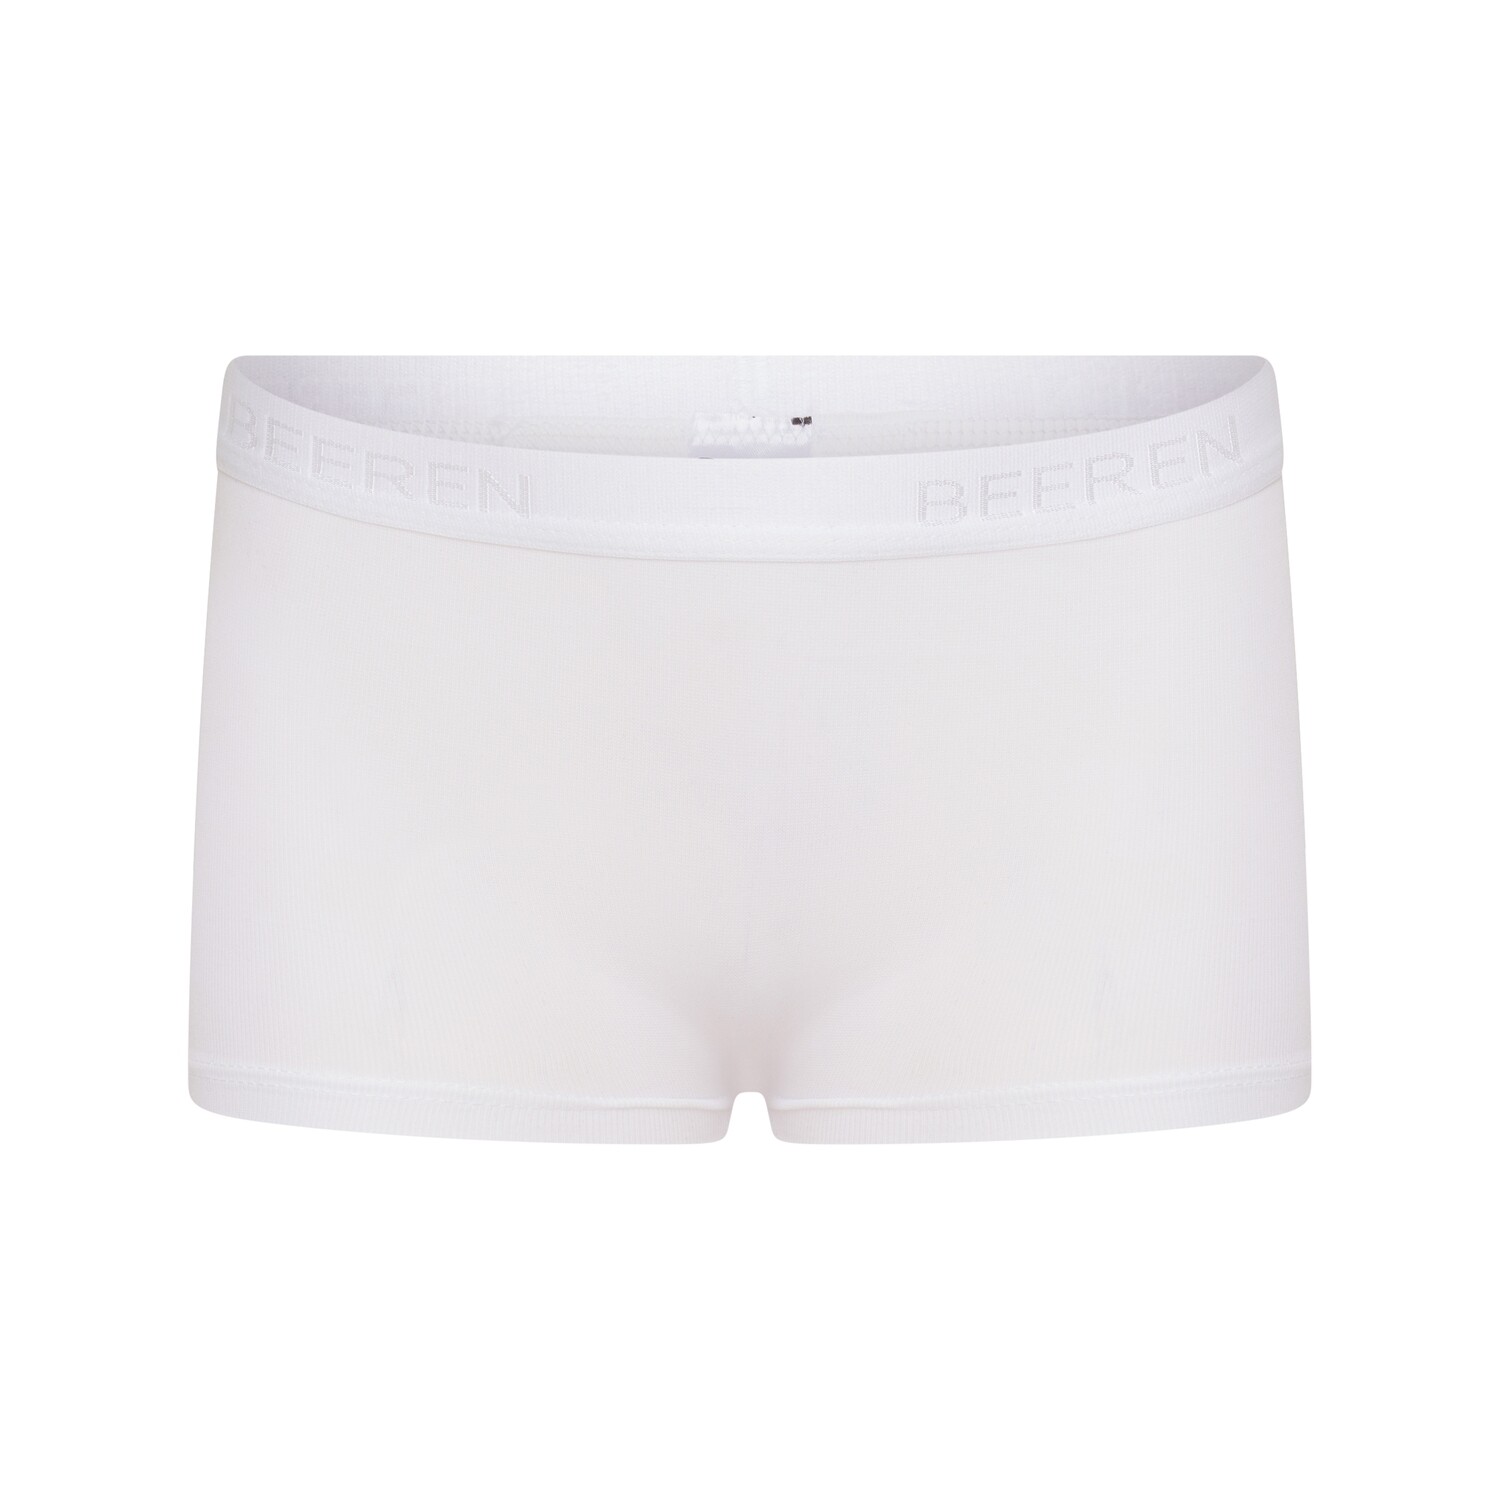 (21-153) Meisjes boxer Young wit 152/164